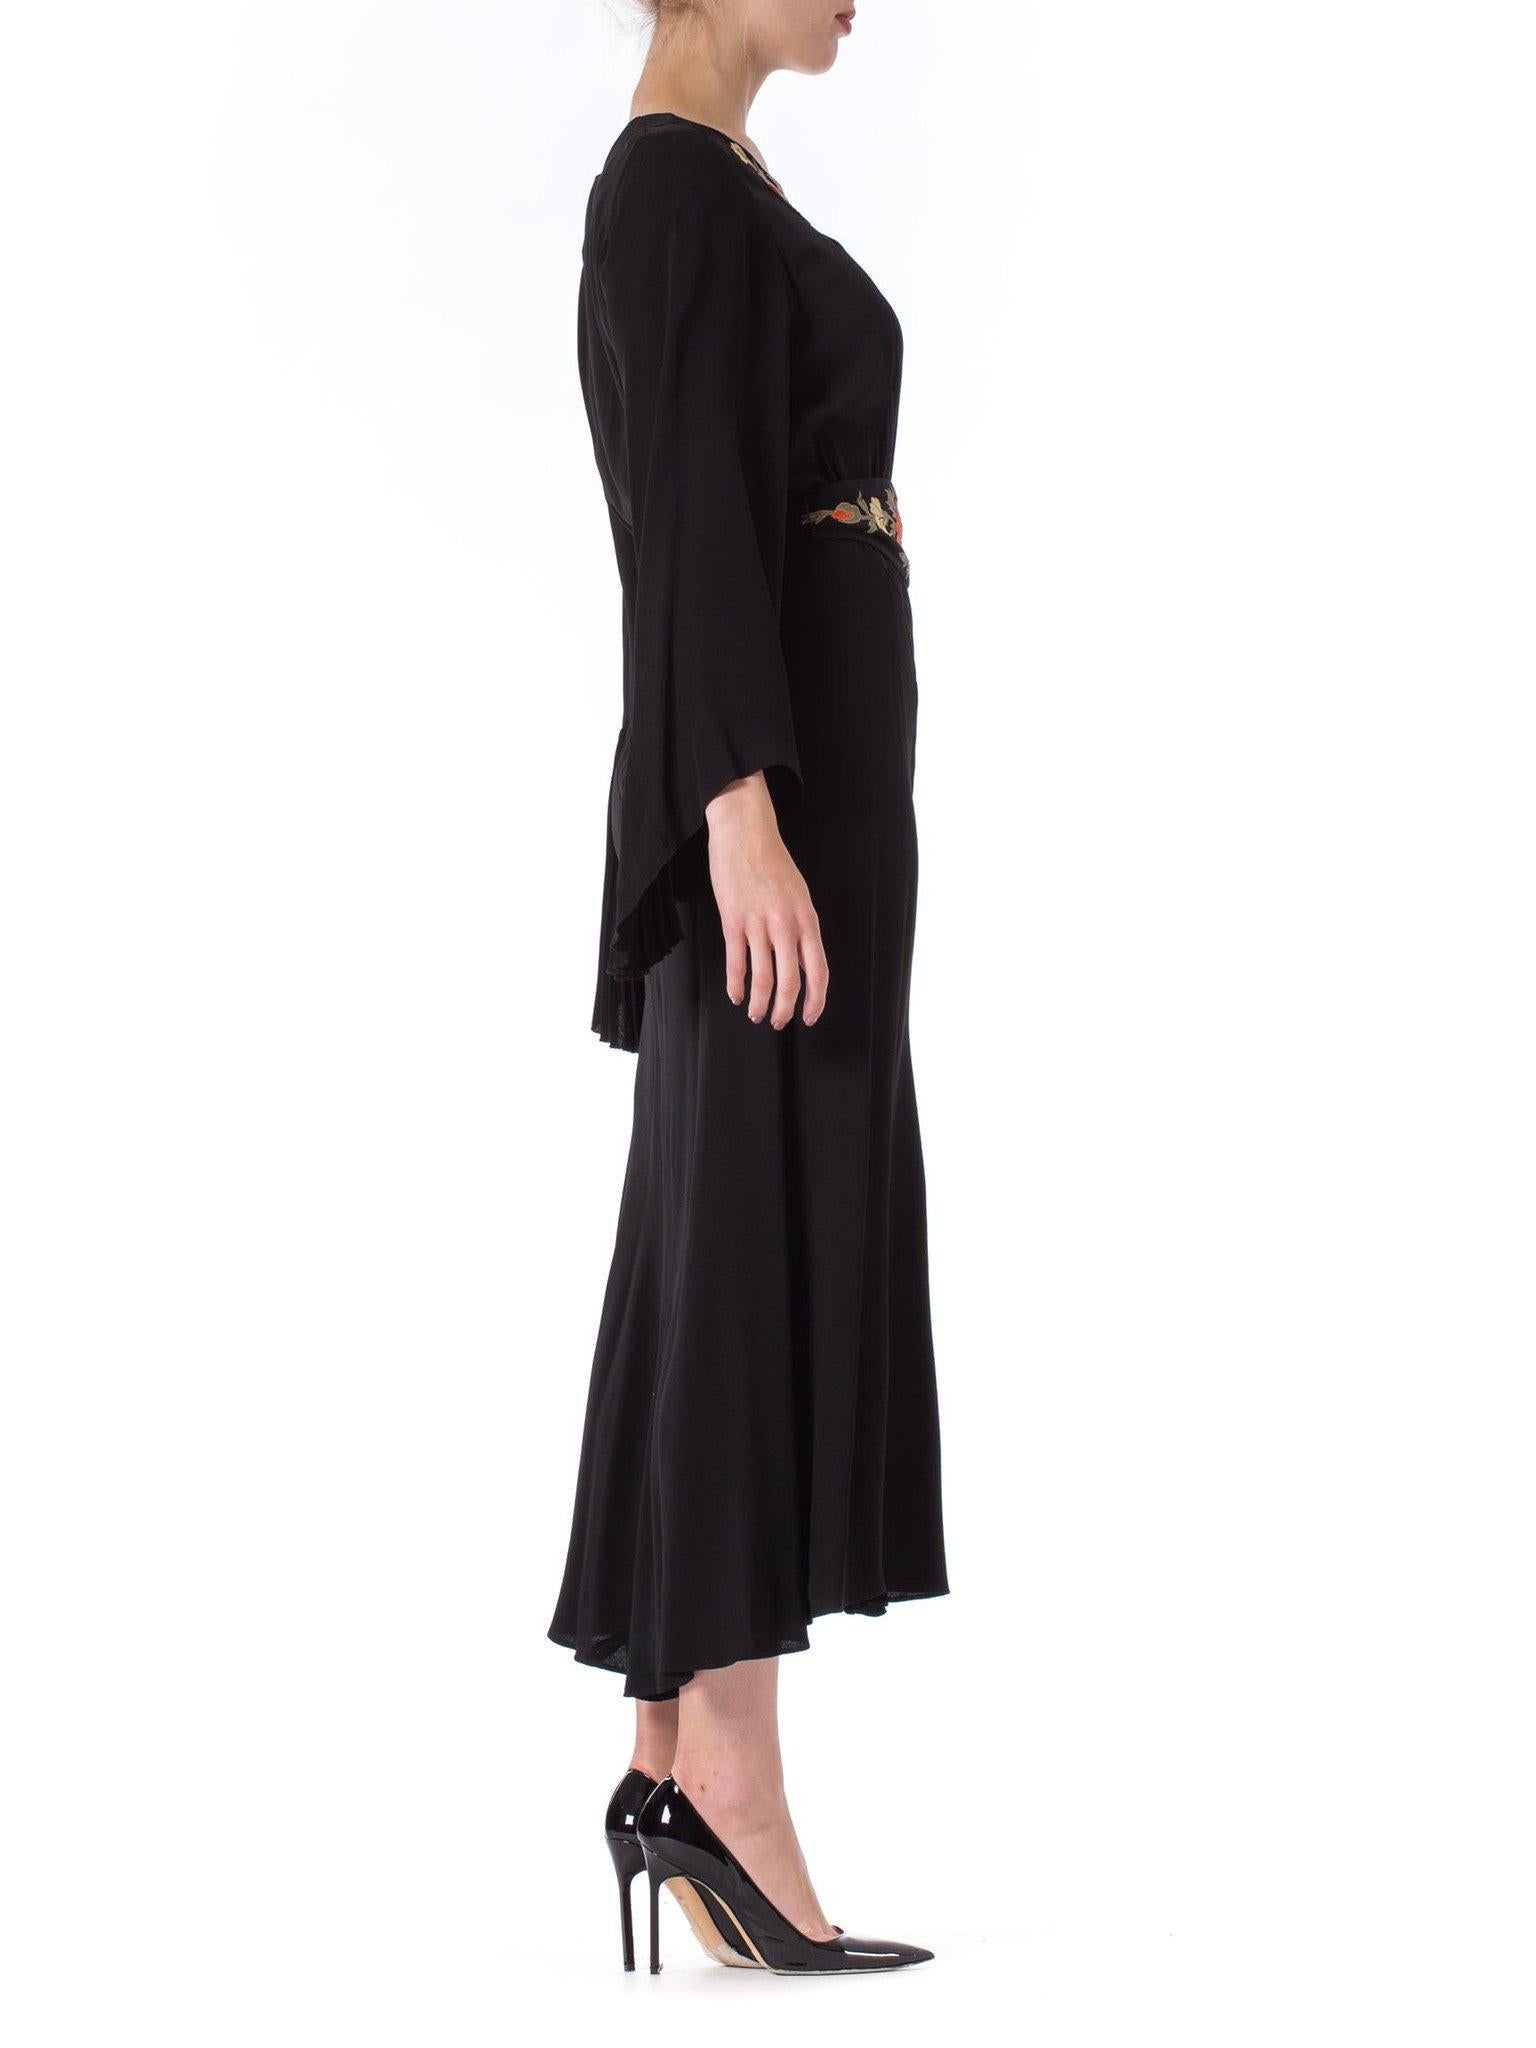 Women's 1930S Black Silk Crepe Back Satin Pleated Bell Sleeve Dress With Floral Appliqu